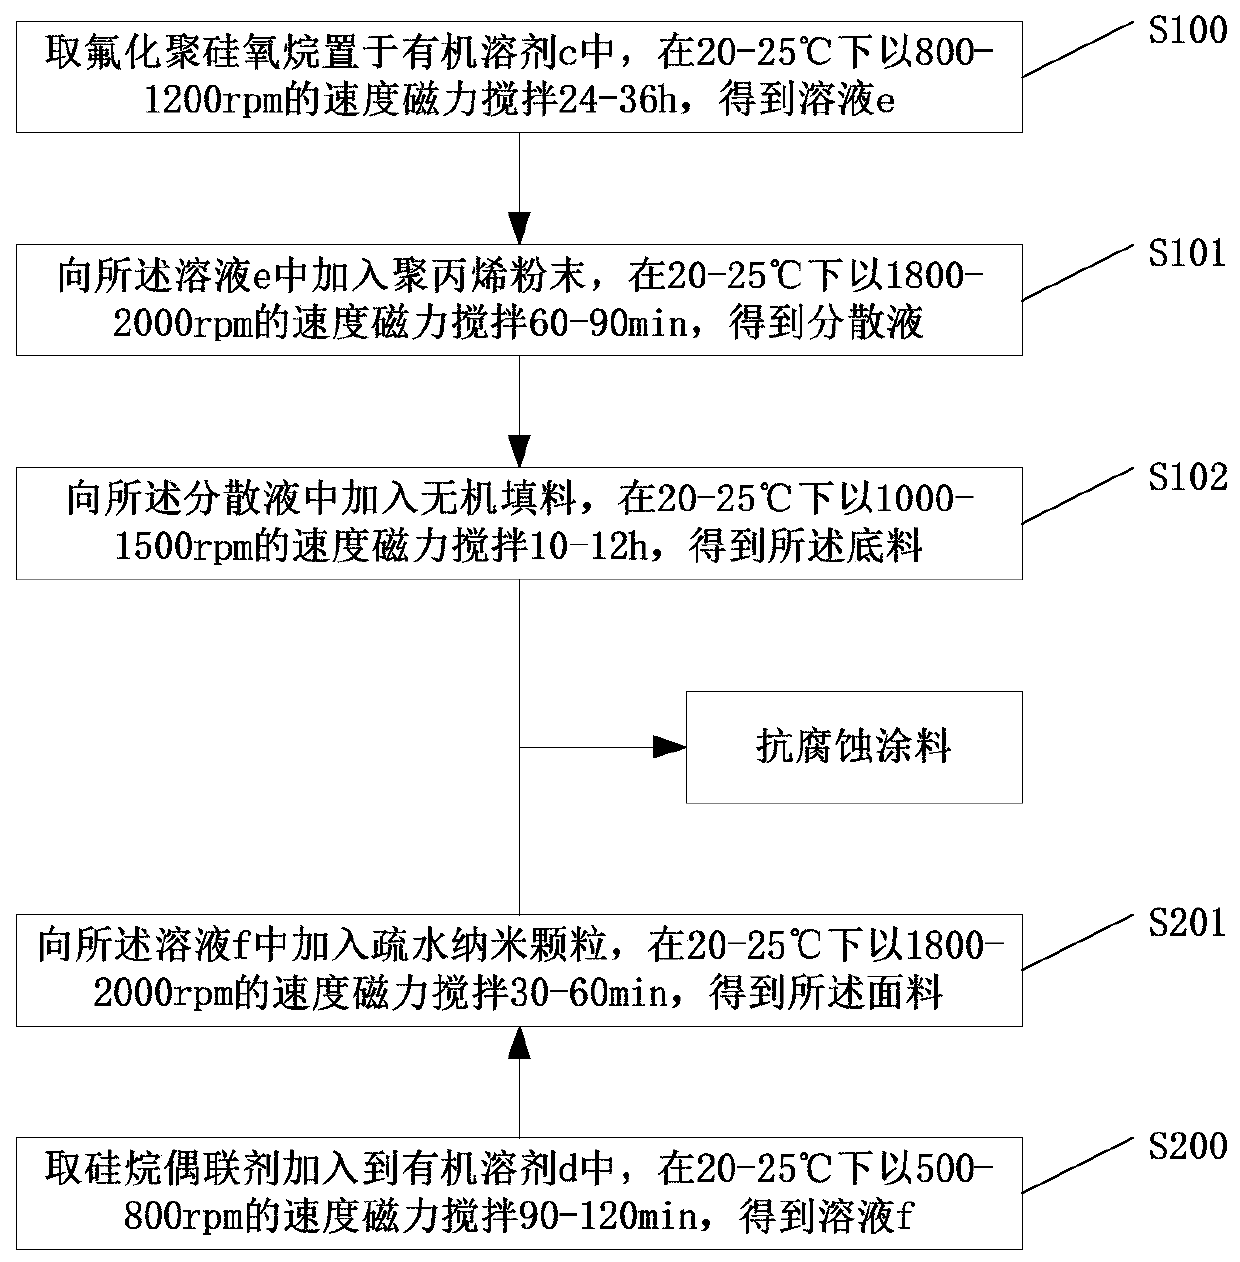 Preparation method of anti-corrosion coating, coating construction method and its application and display stand